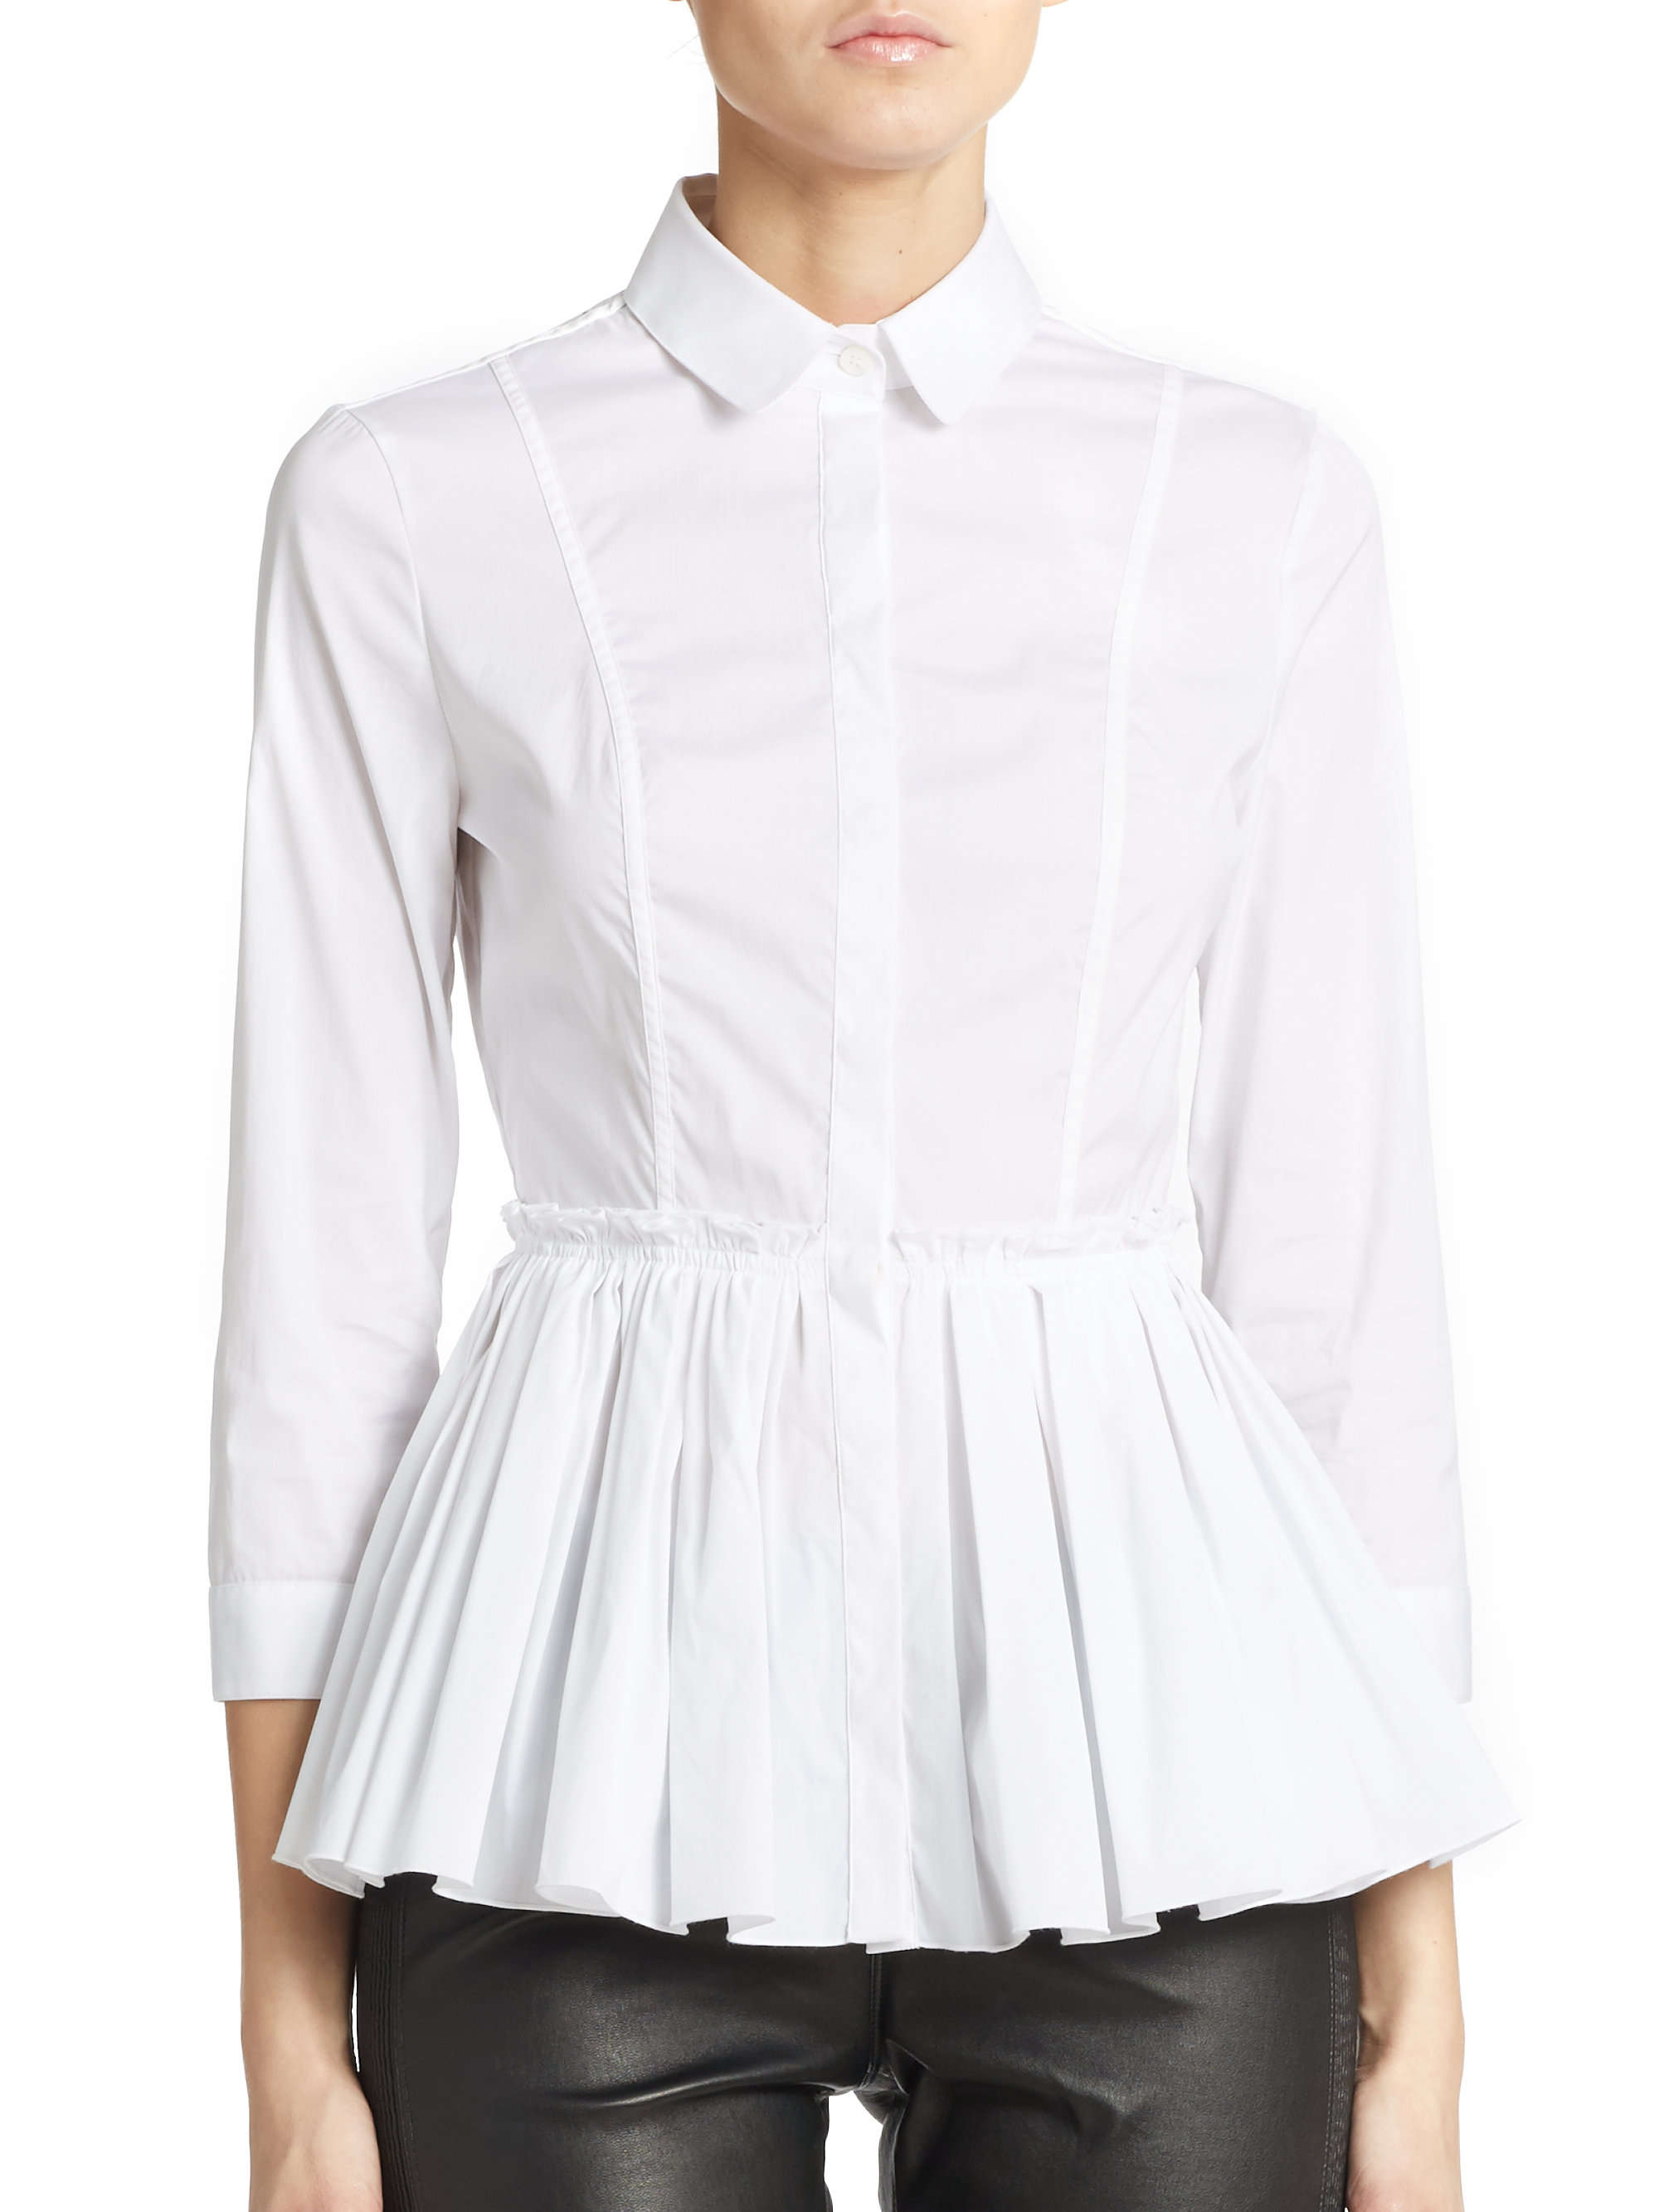 Lyst - Burberry Stretch Cotton Pleated Peplum Blouse in White